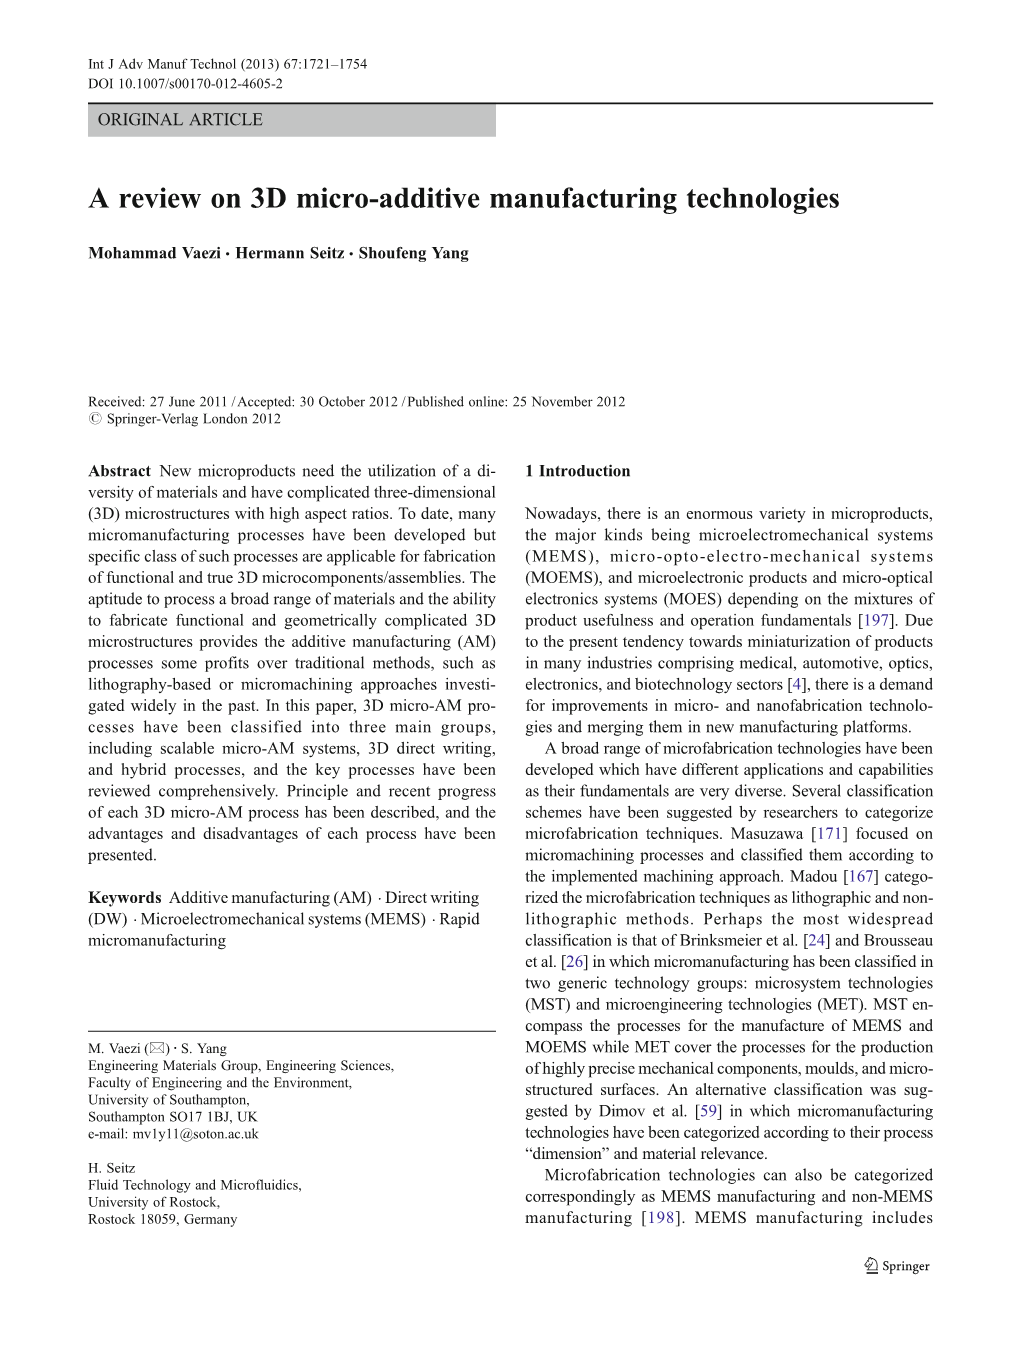 A Review on 3D Micro-Additive Manufacturing Technologies